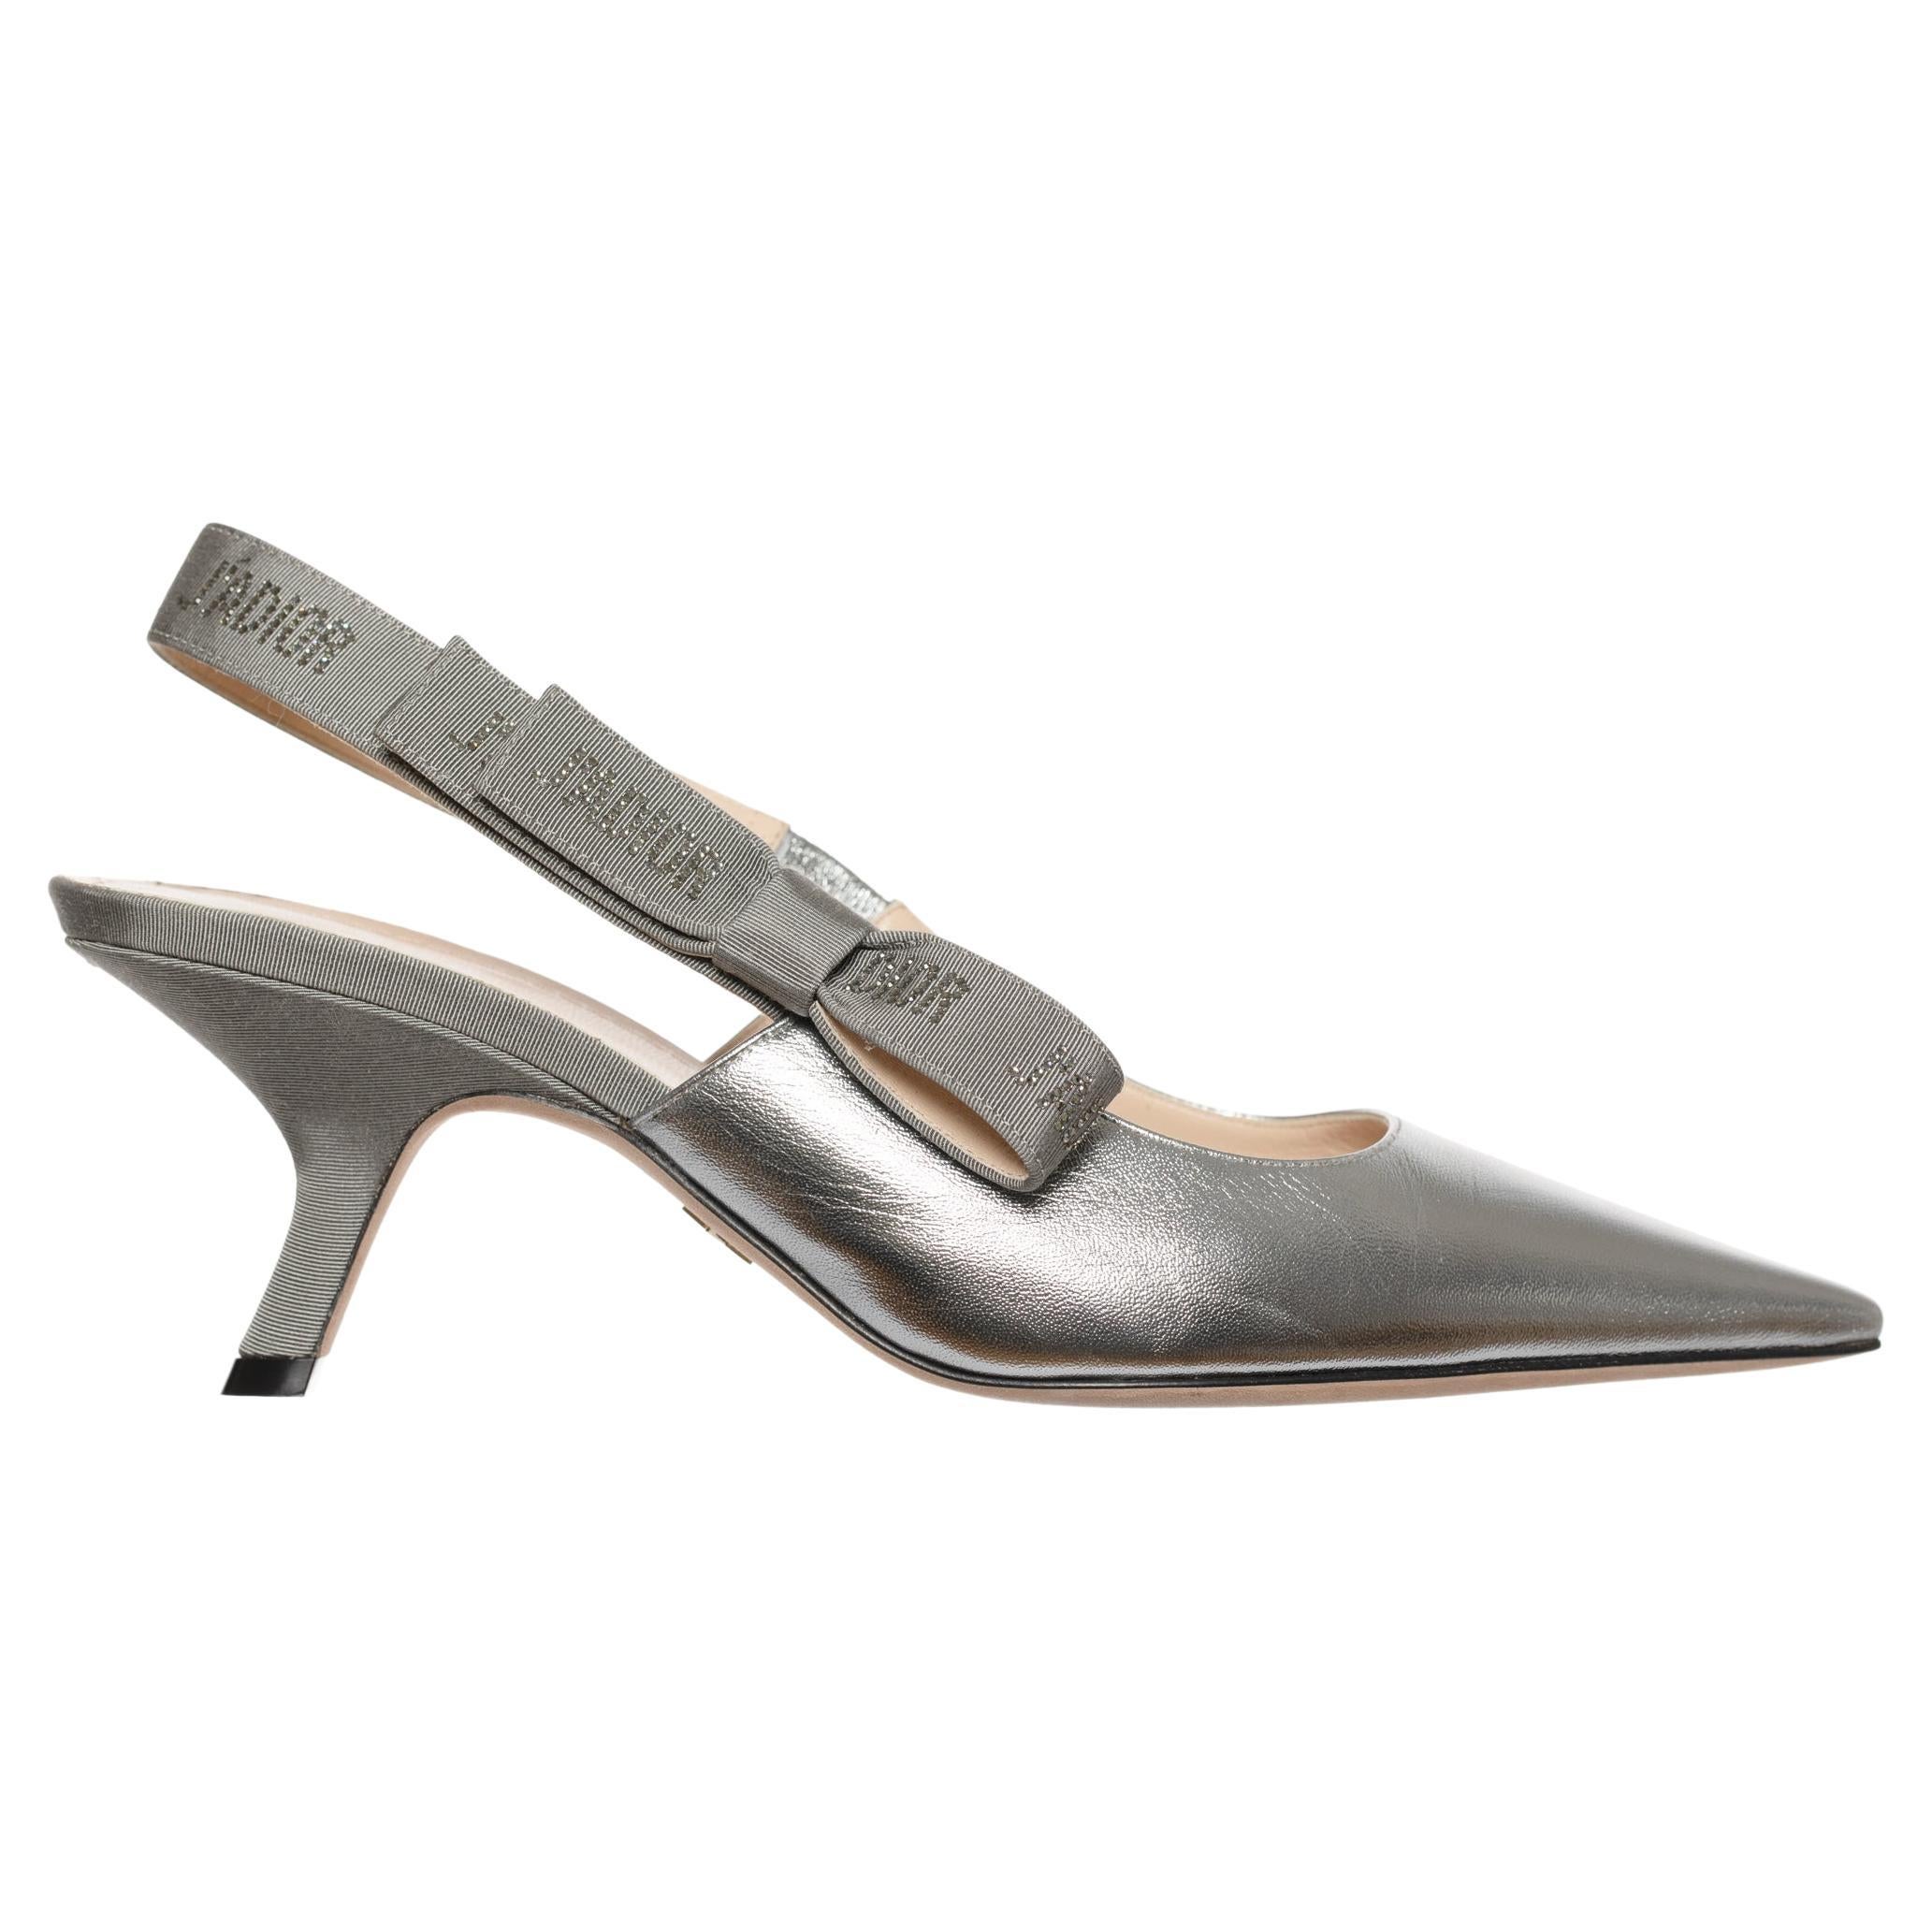 Are slingback heels more comfortable?